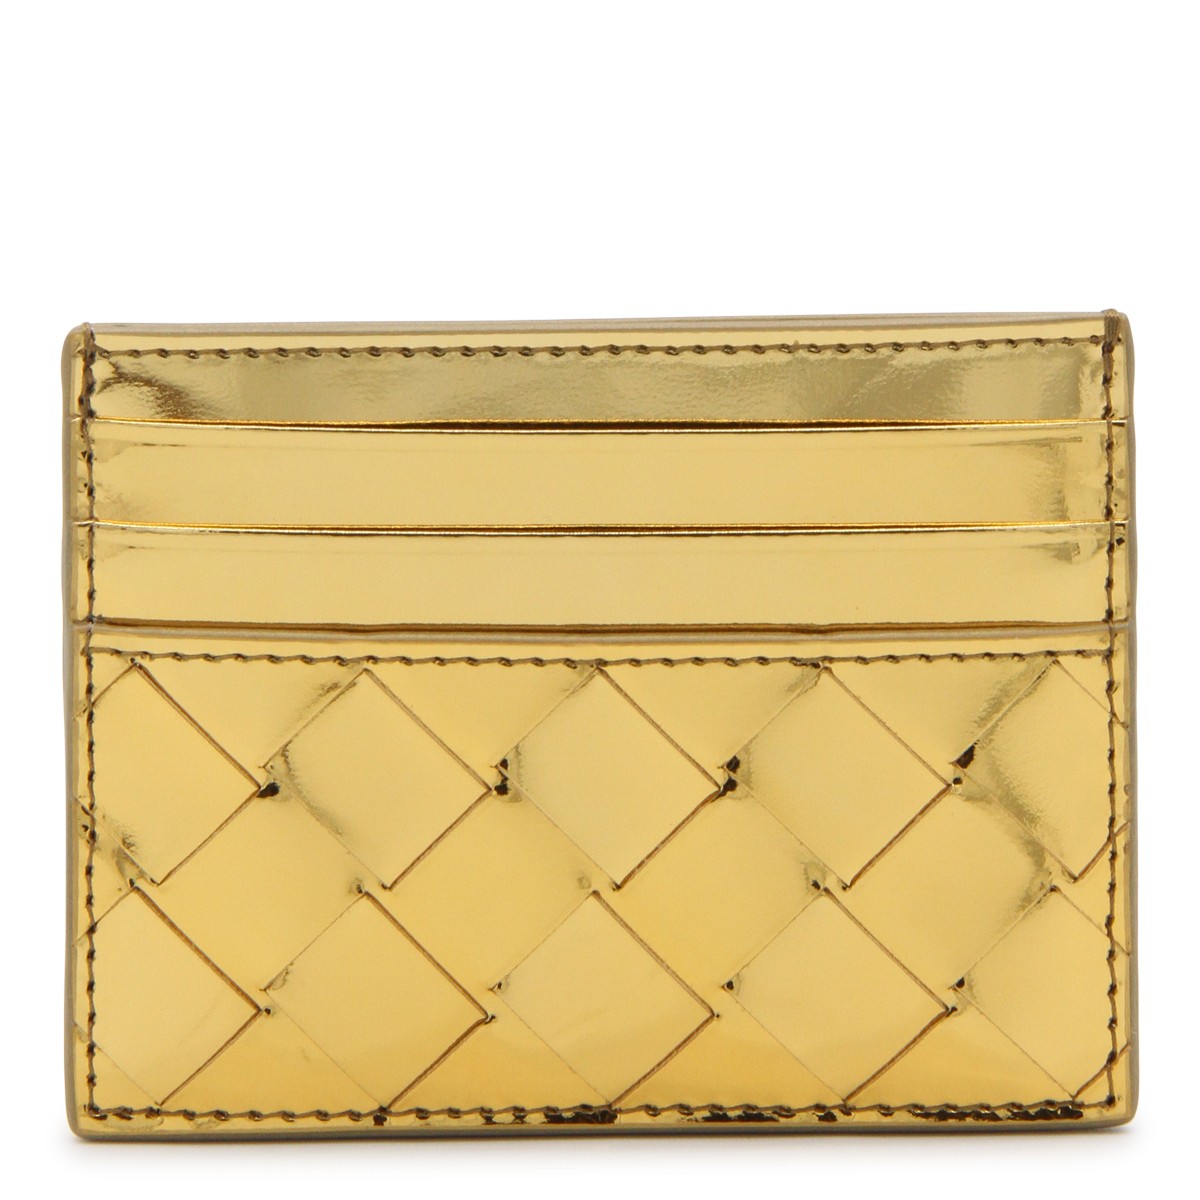 GOLD-TONE LEATHER CARD HOLDERS